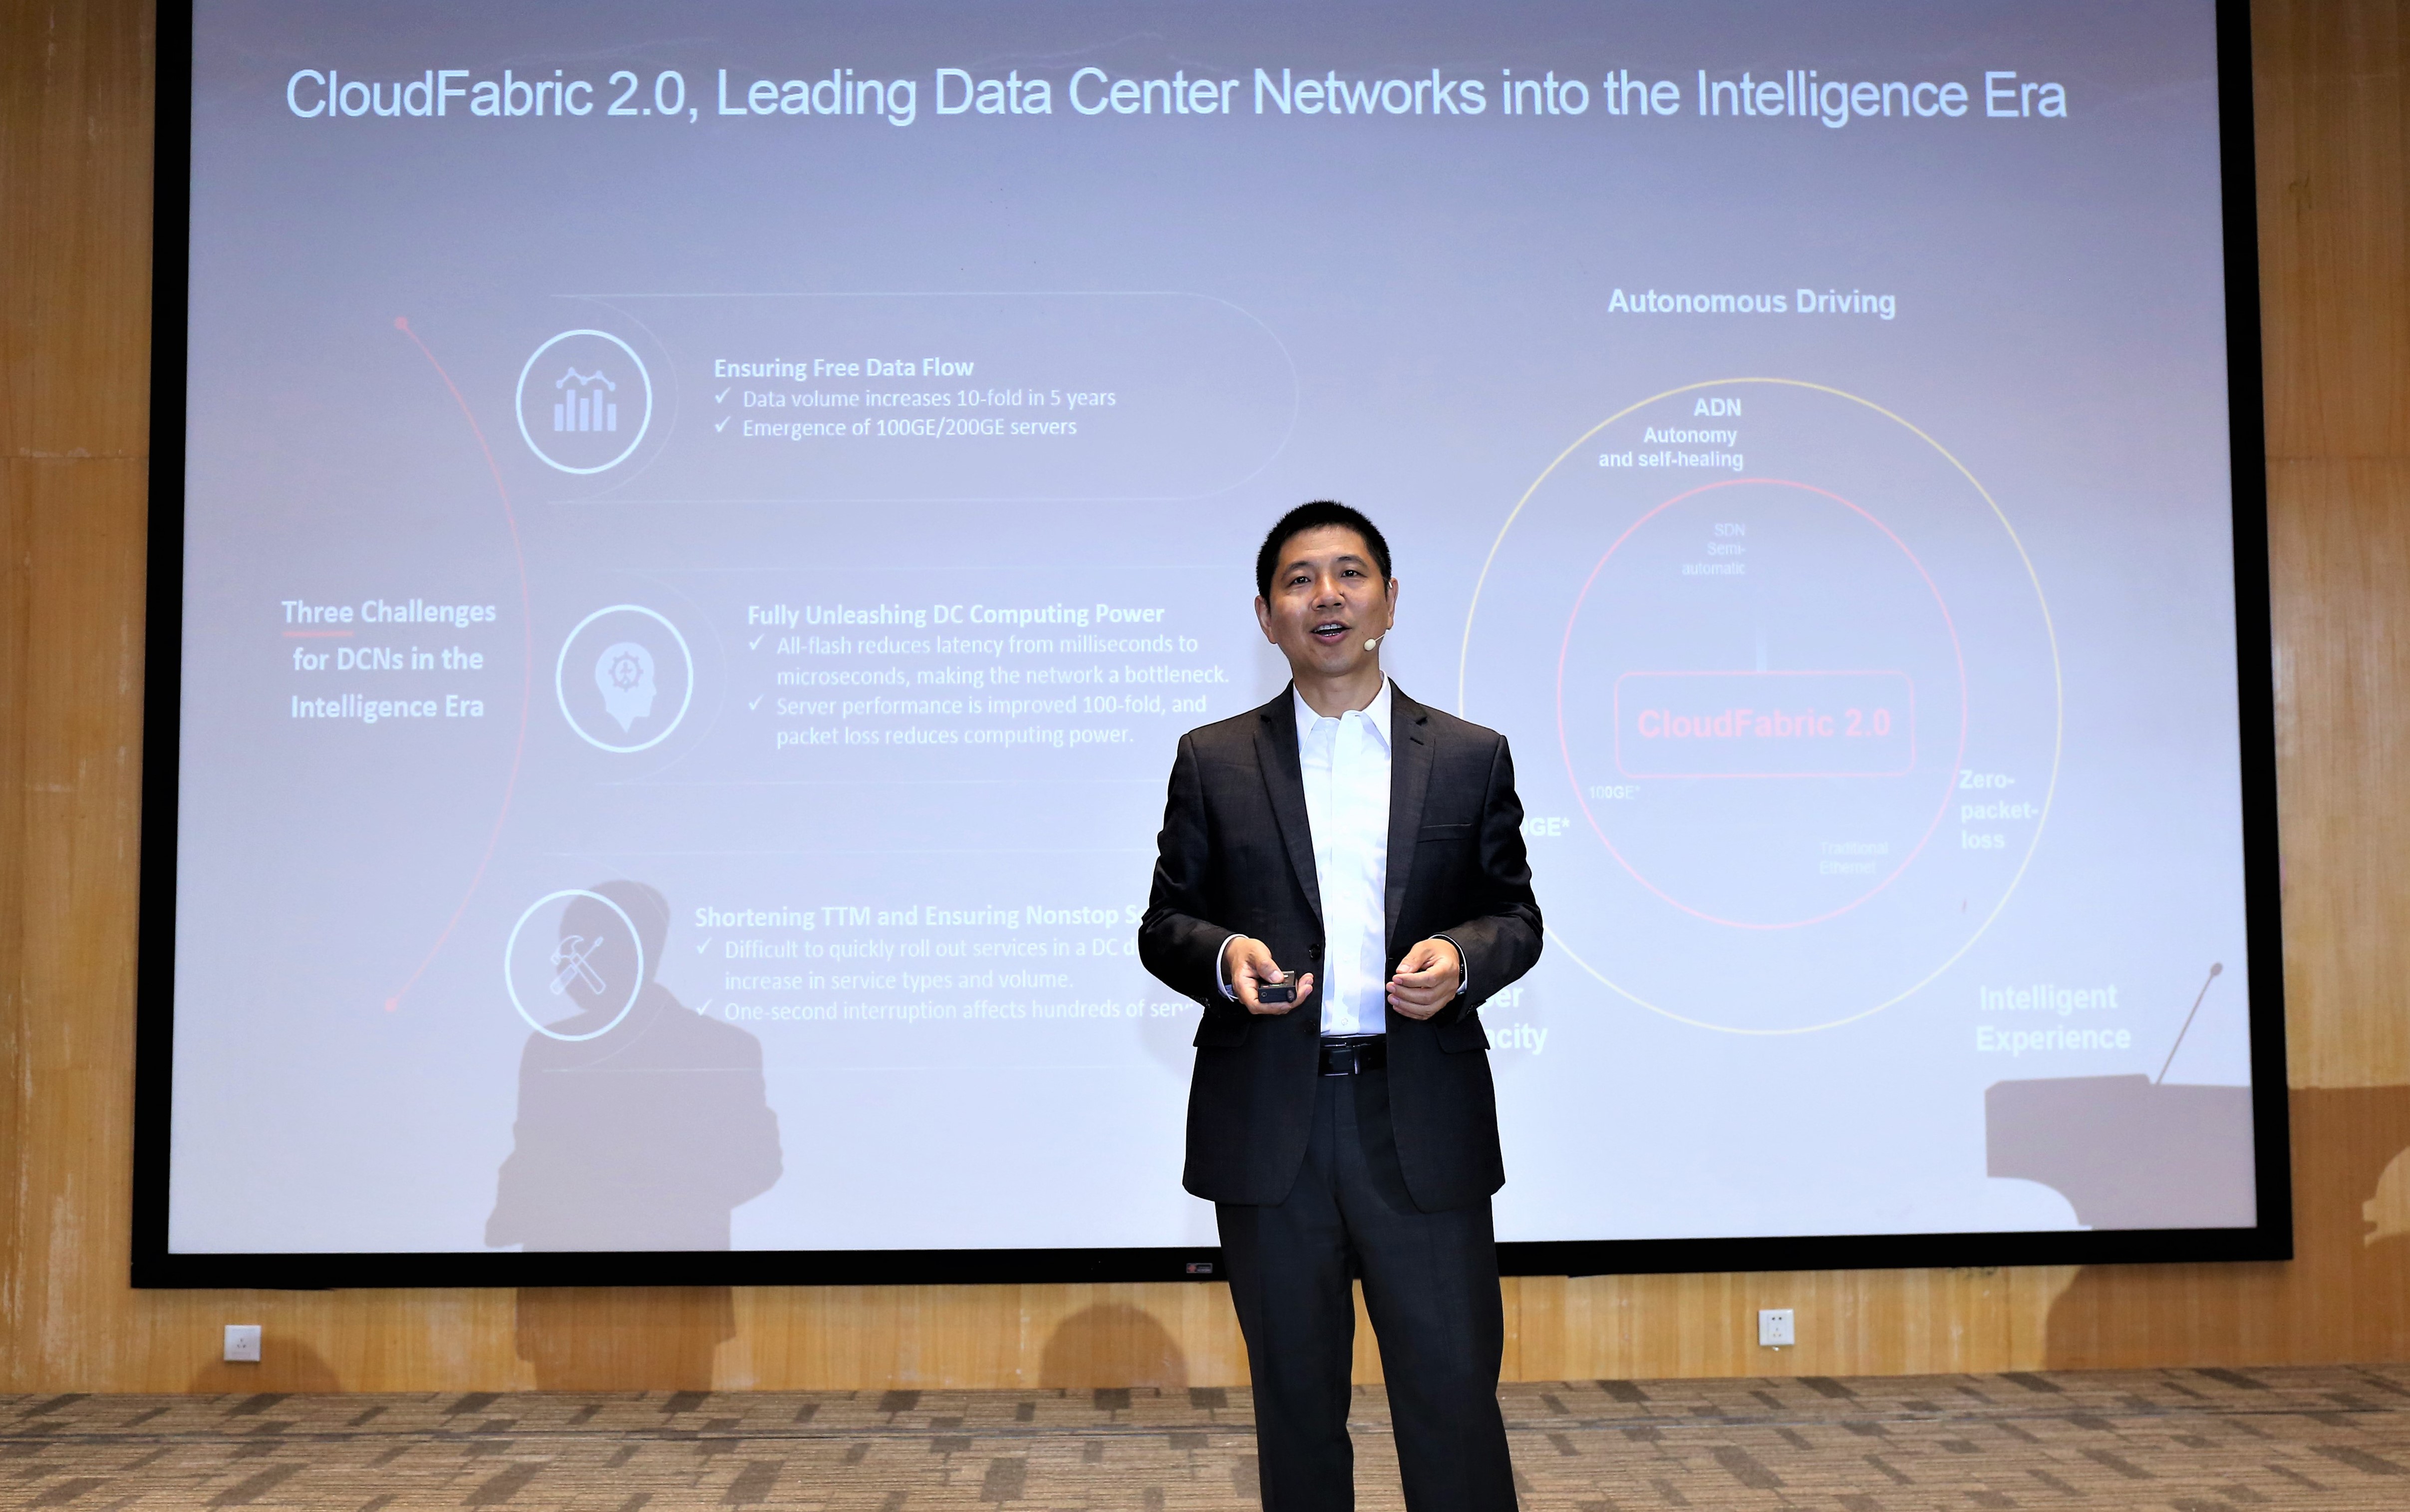 Leon Wang, President of Huawei's Data Center Network Domain, launches the upgraded CloudFabric 2.0